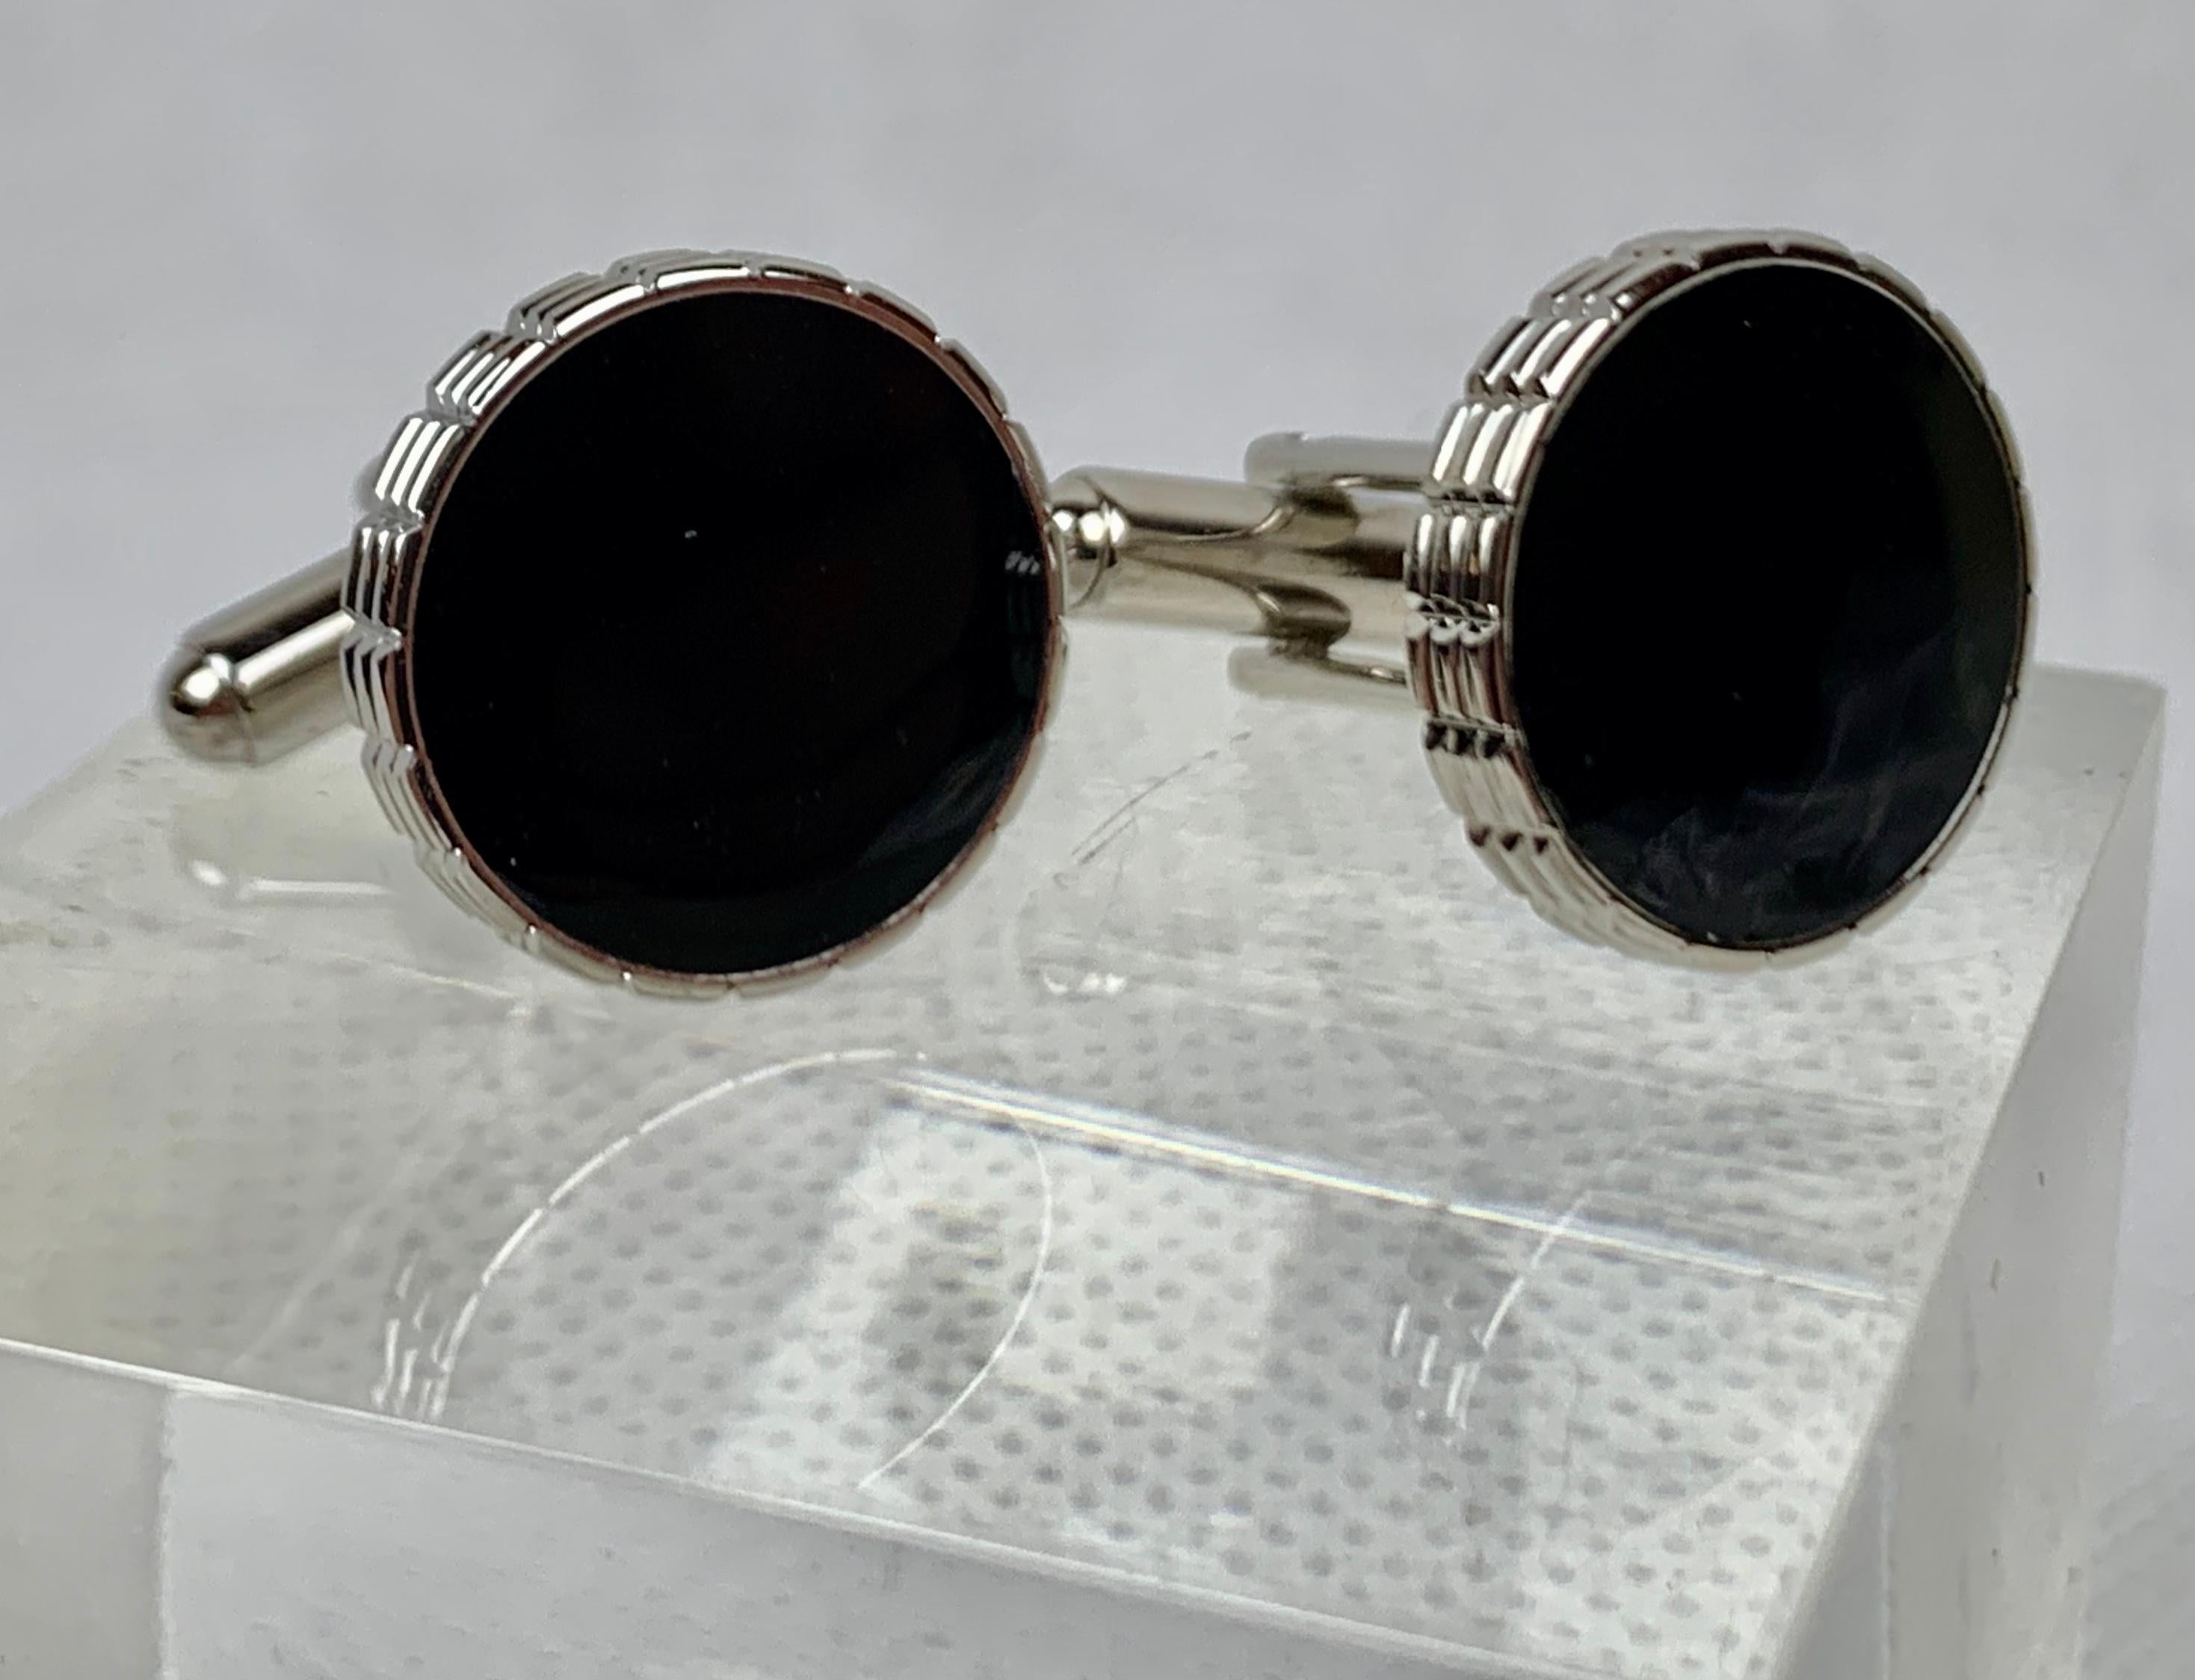 A vintage pair of round silver tone cufflinks with black enamel.  The backs are 